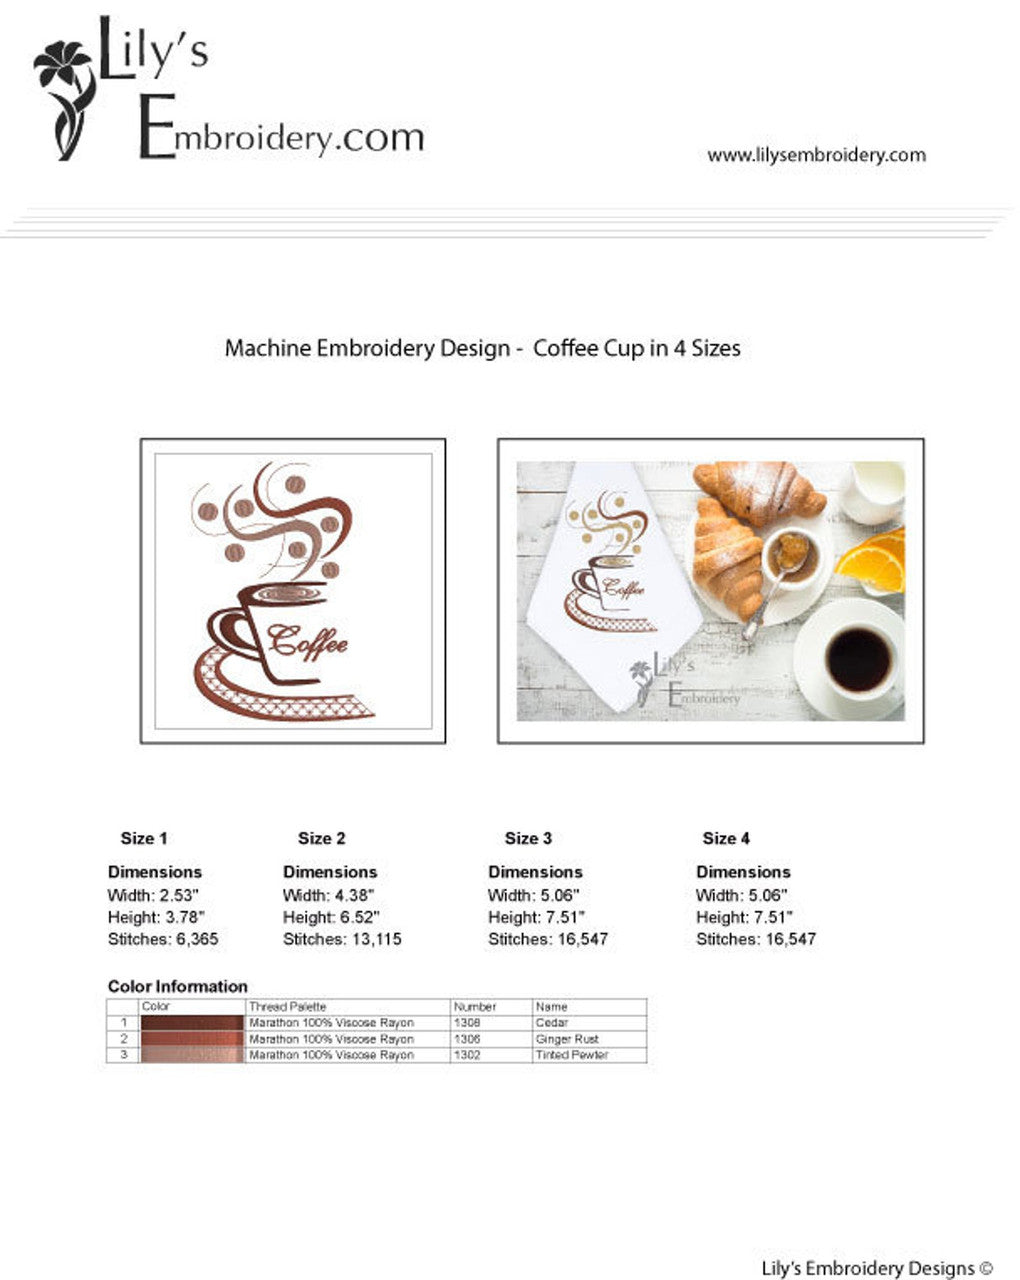 Machine Embroidery Design - Coffee Cup Embroidery in 4 Sizes